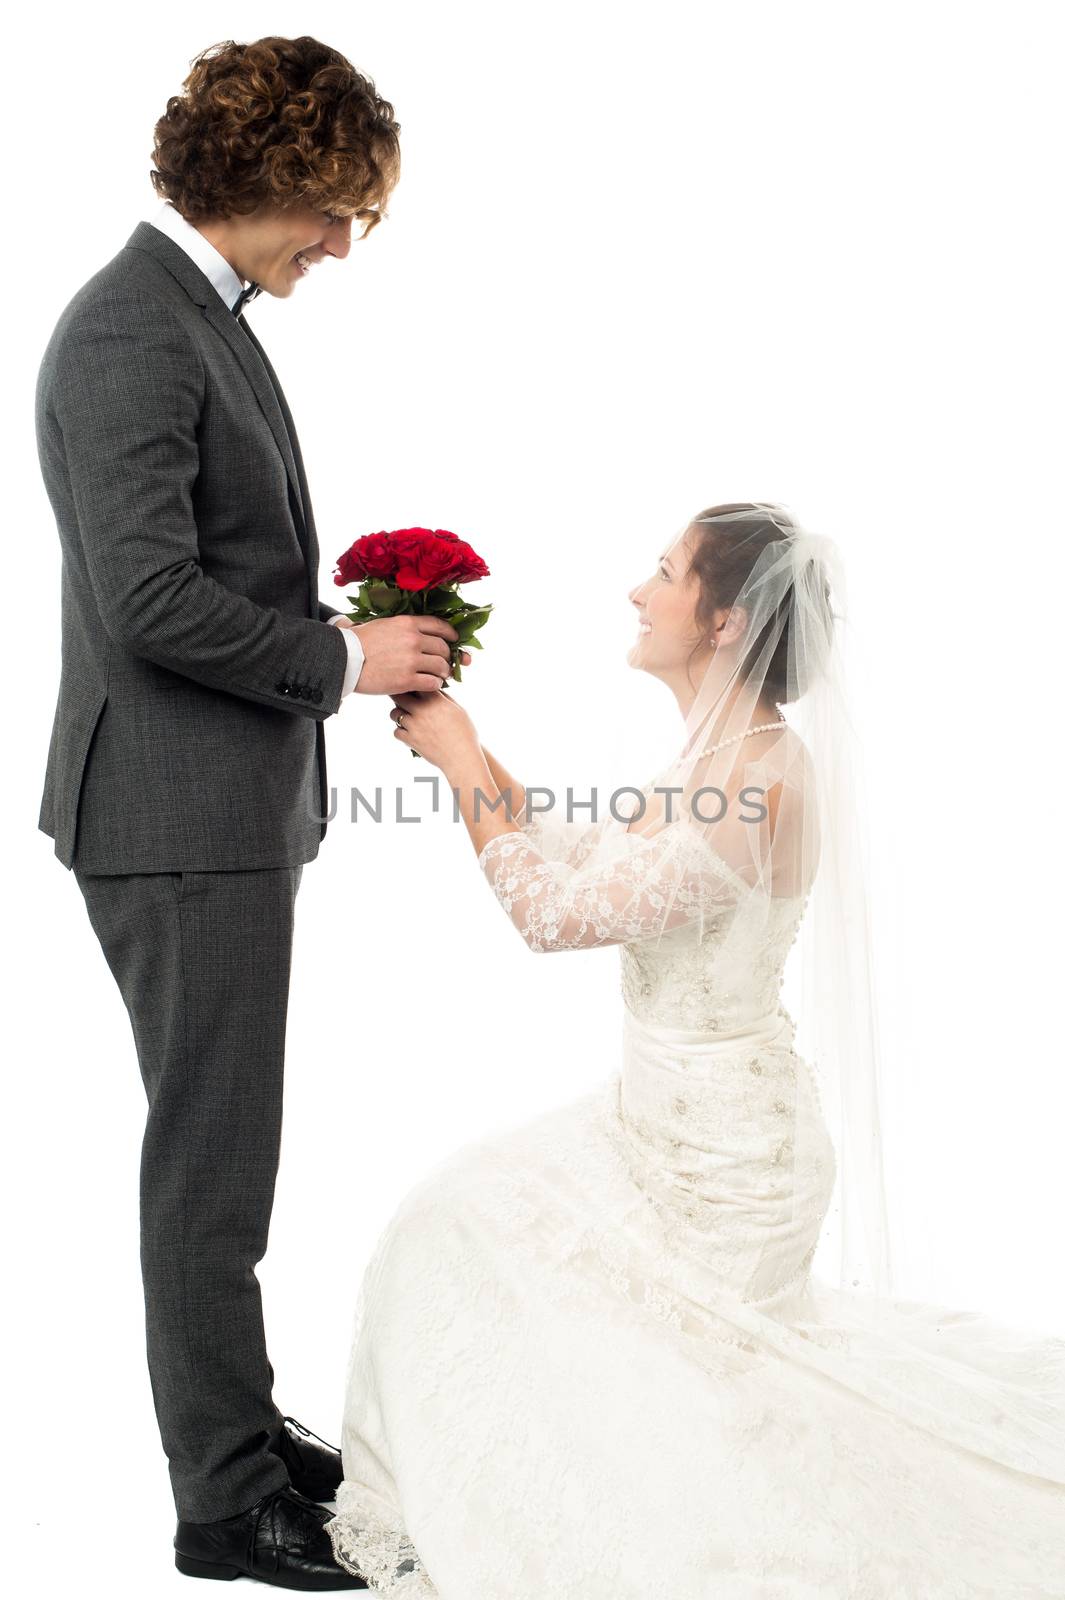 Marry me please, will you? by stockyimages